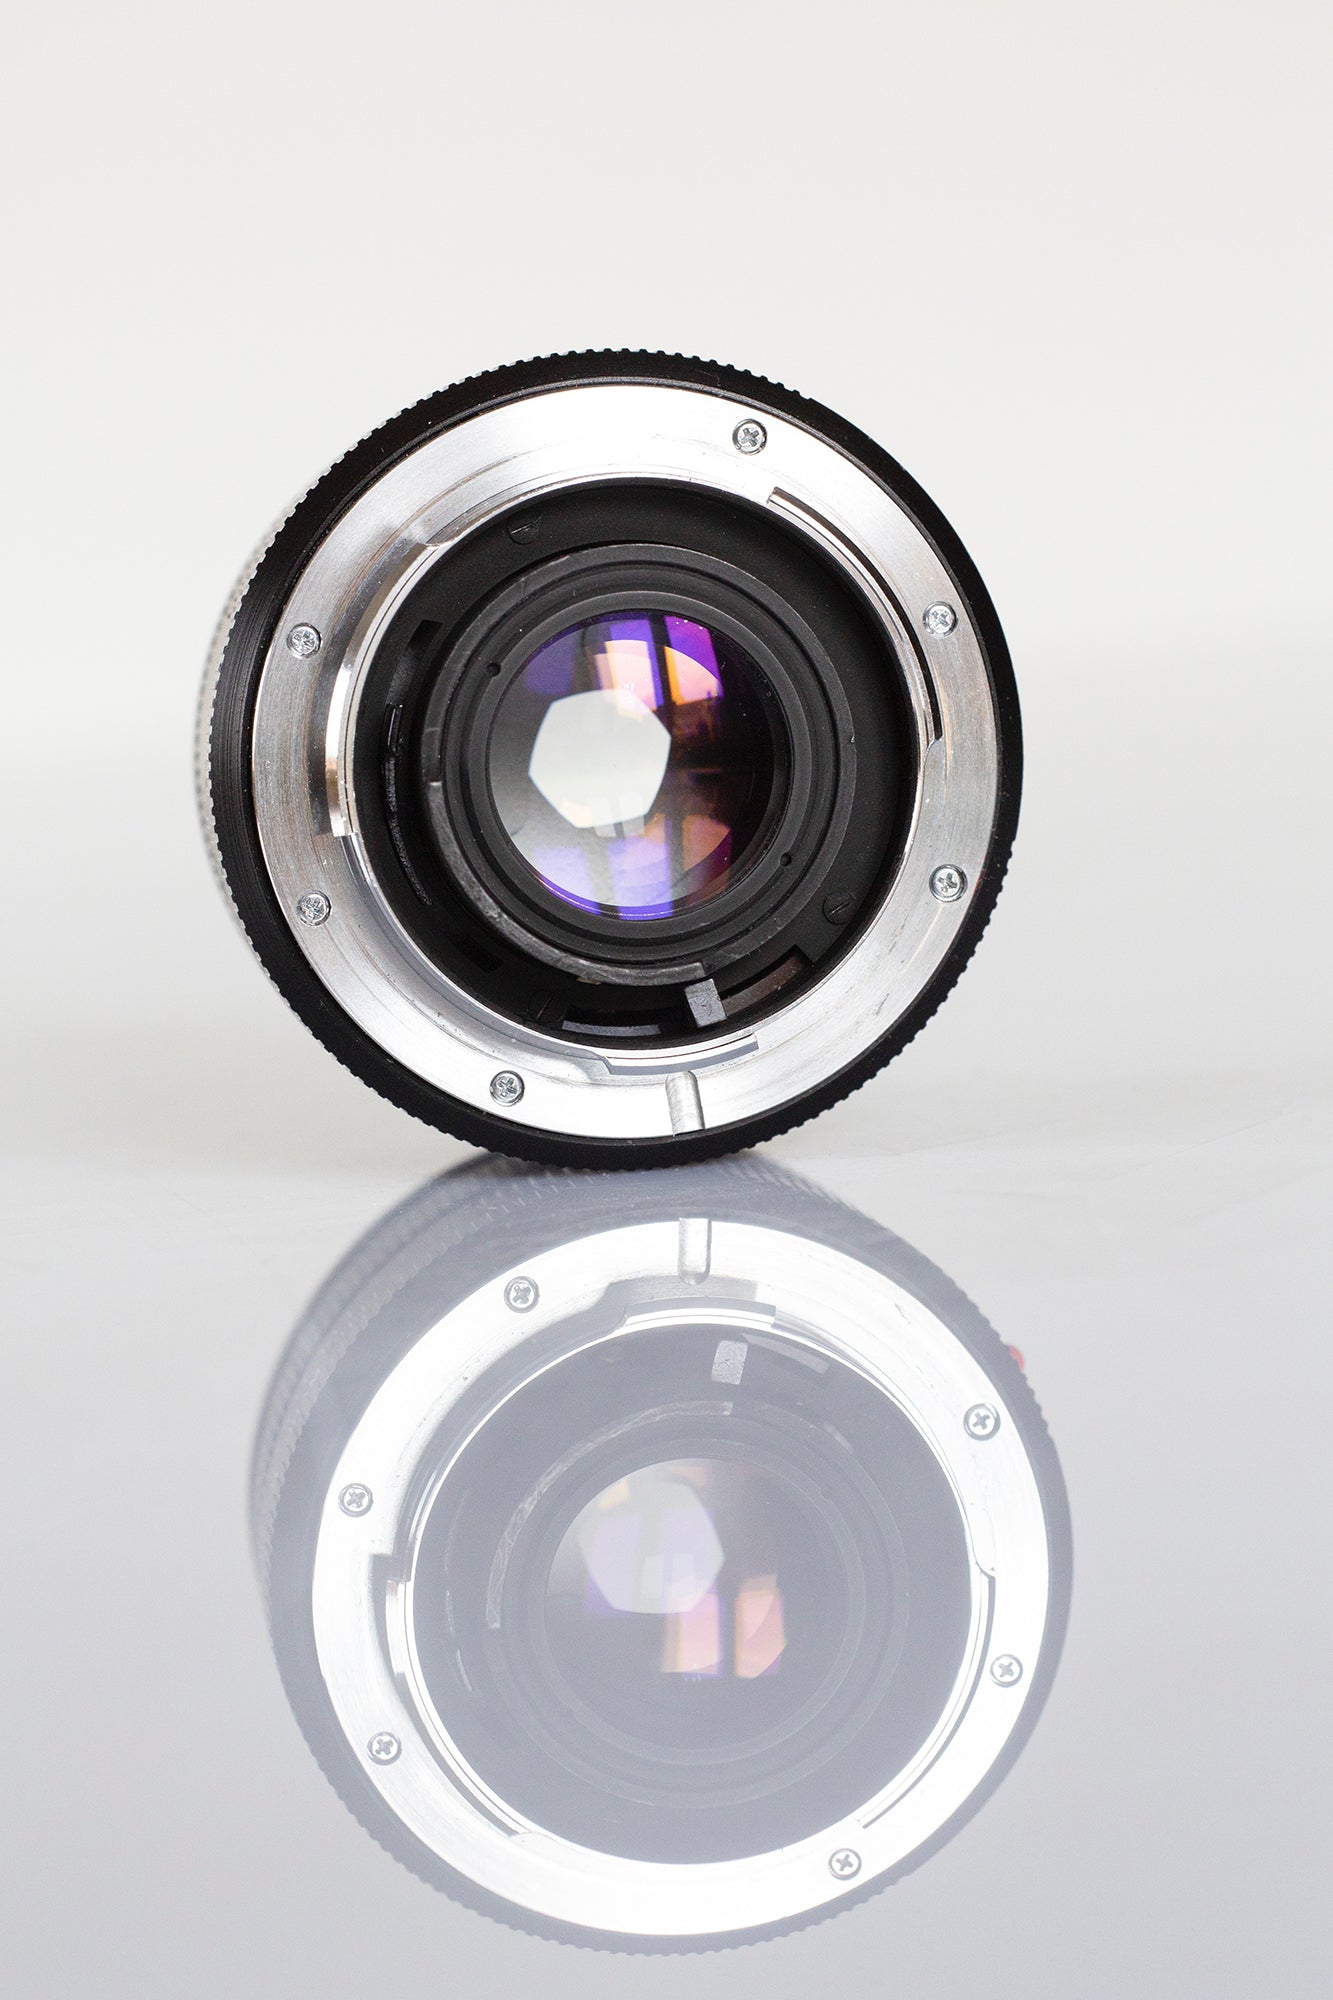 A fully serviced vintage lens, showing clear optics and aperture blades. 